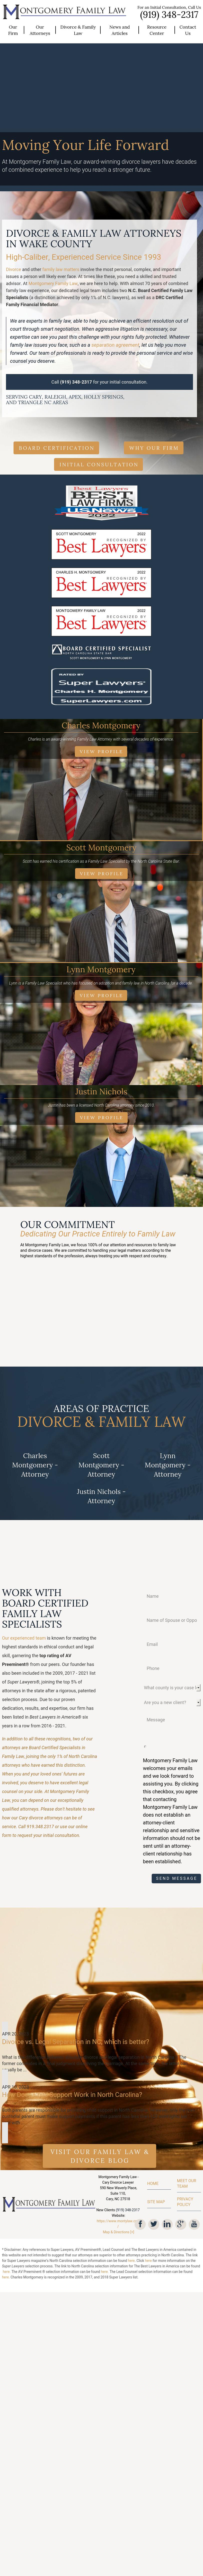 Charles H. Montgomery - Cary NC Lawyers